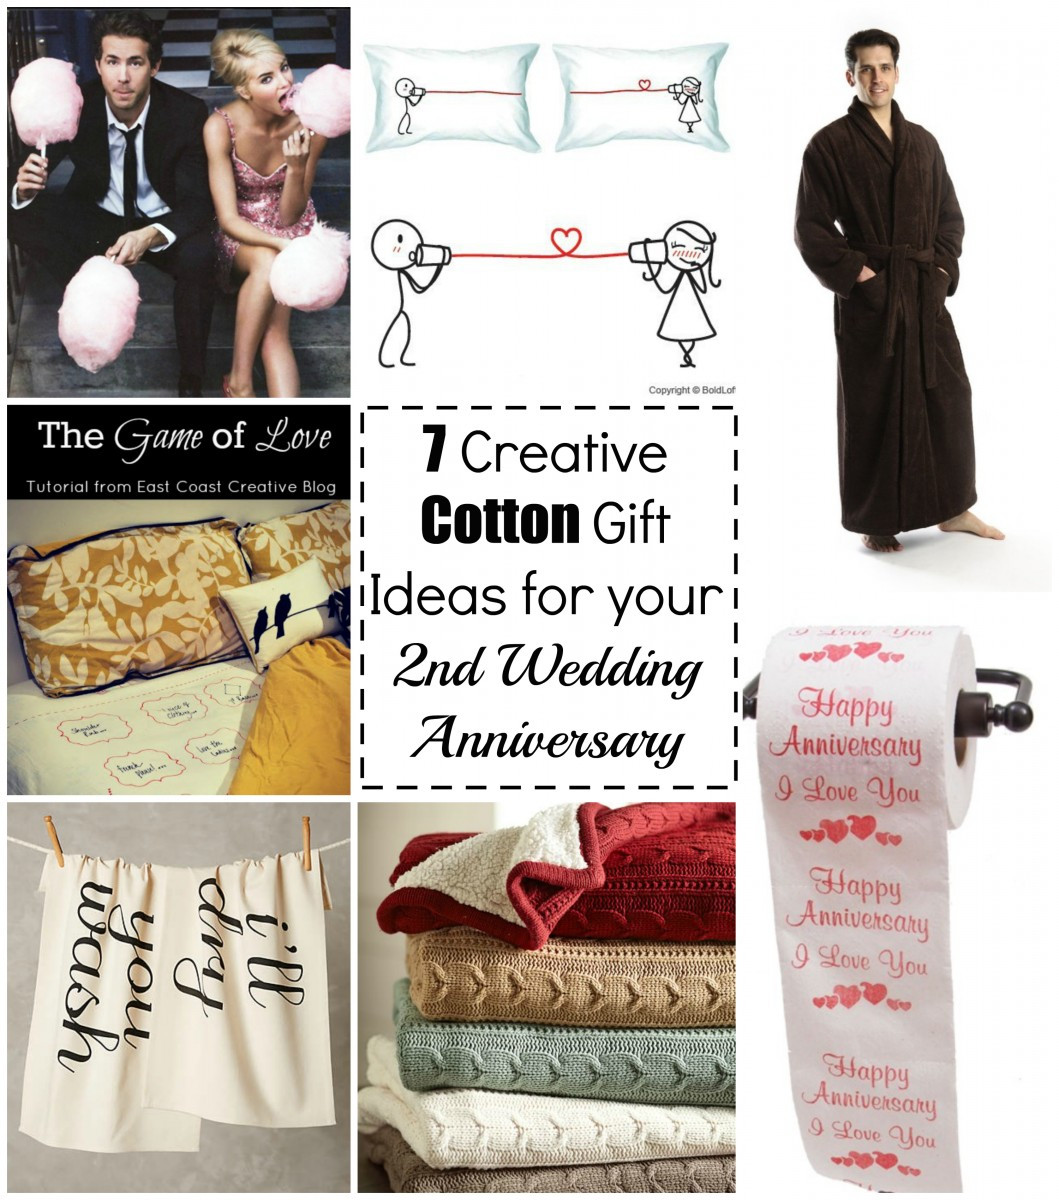 2Nd Year Anniversary Gift Ideas
 7 Cotton Gift Ideas for your 2nd Wedding Anniversary